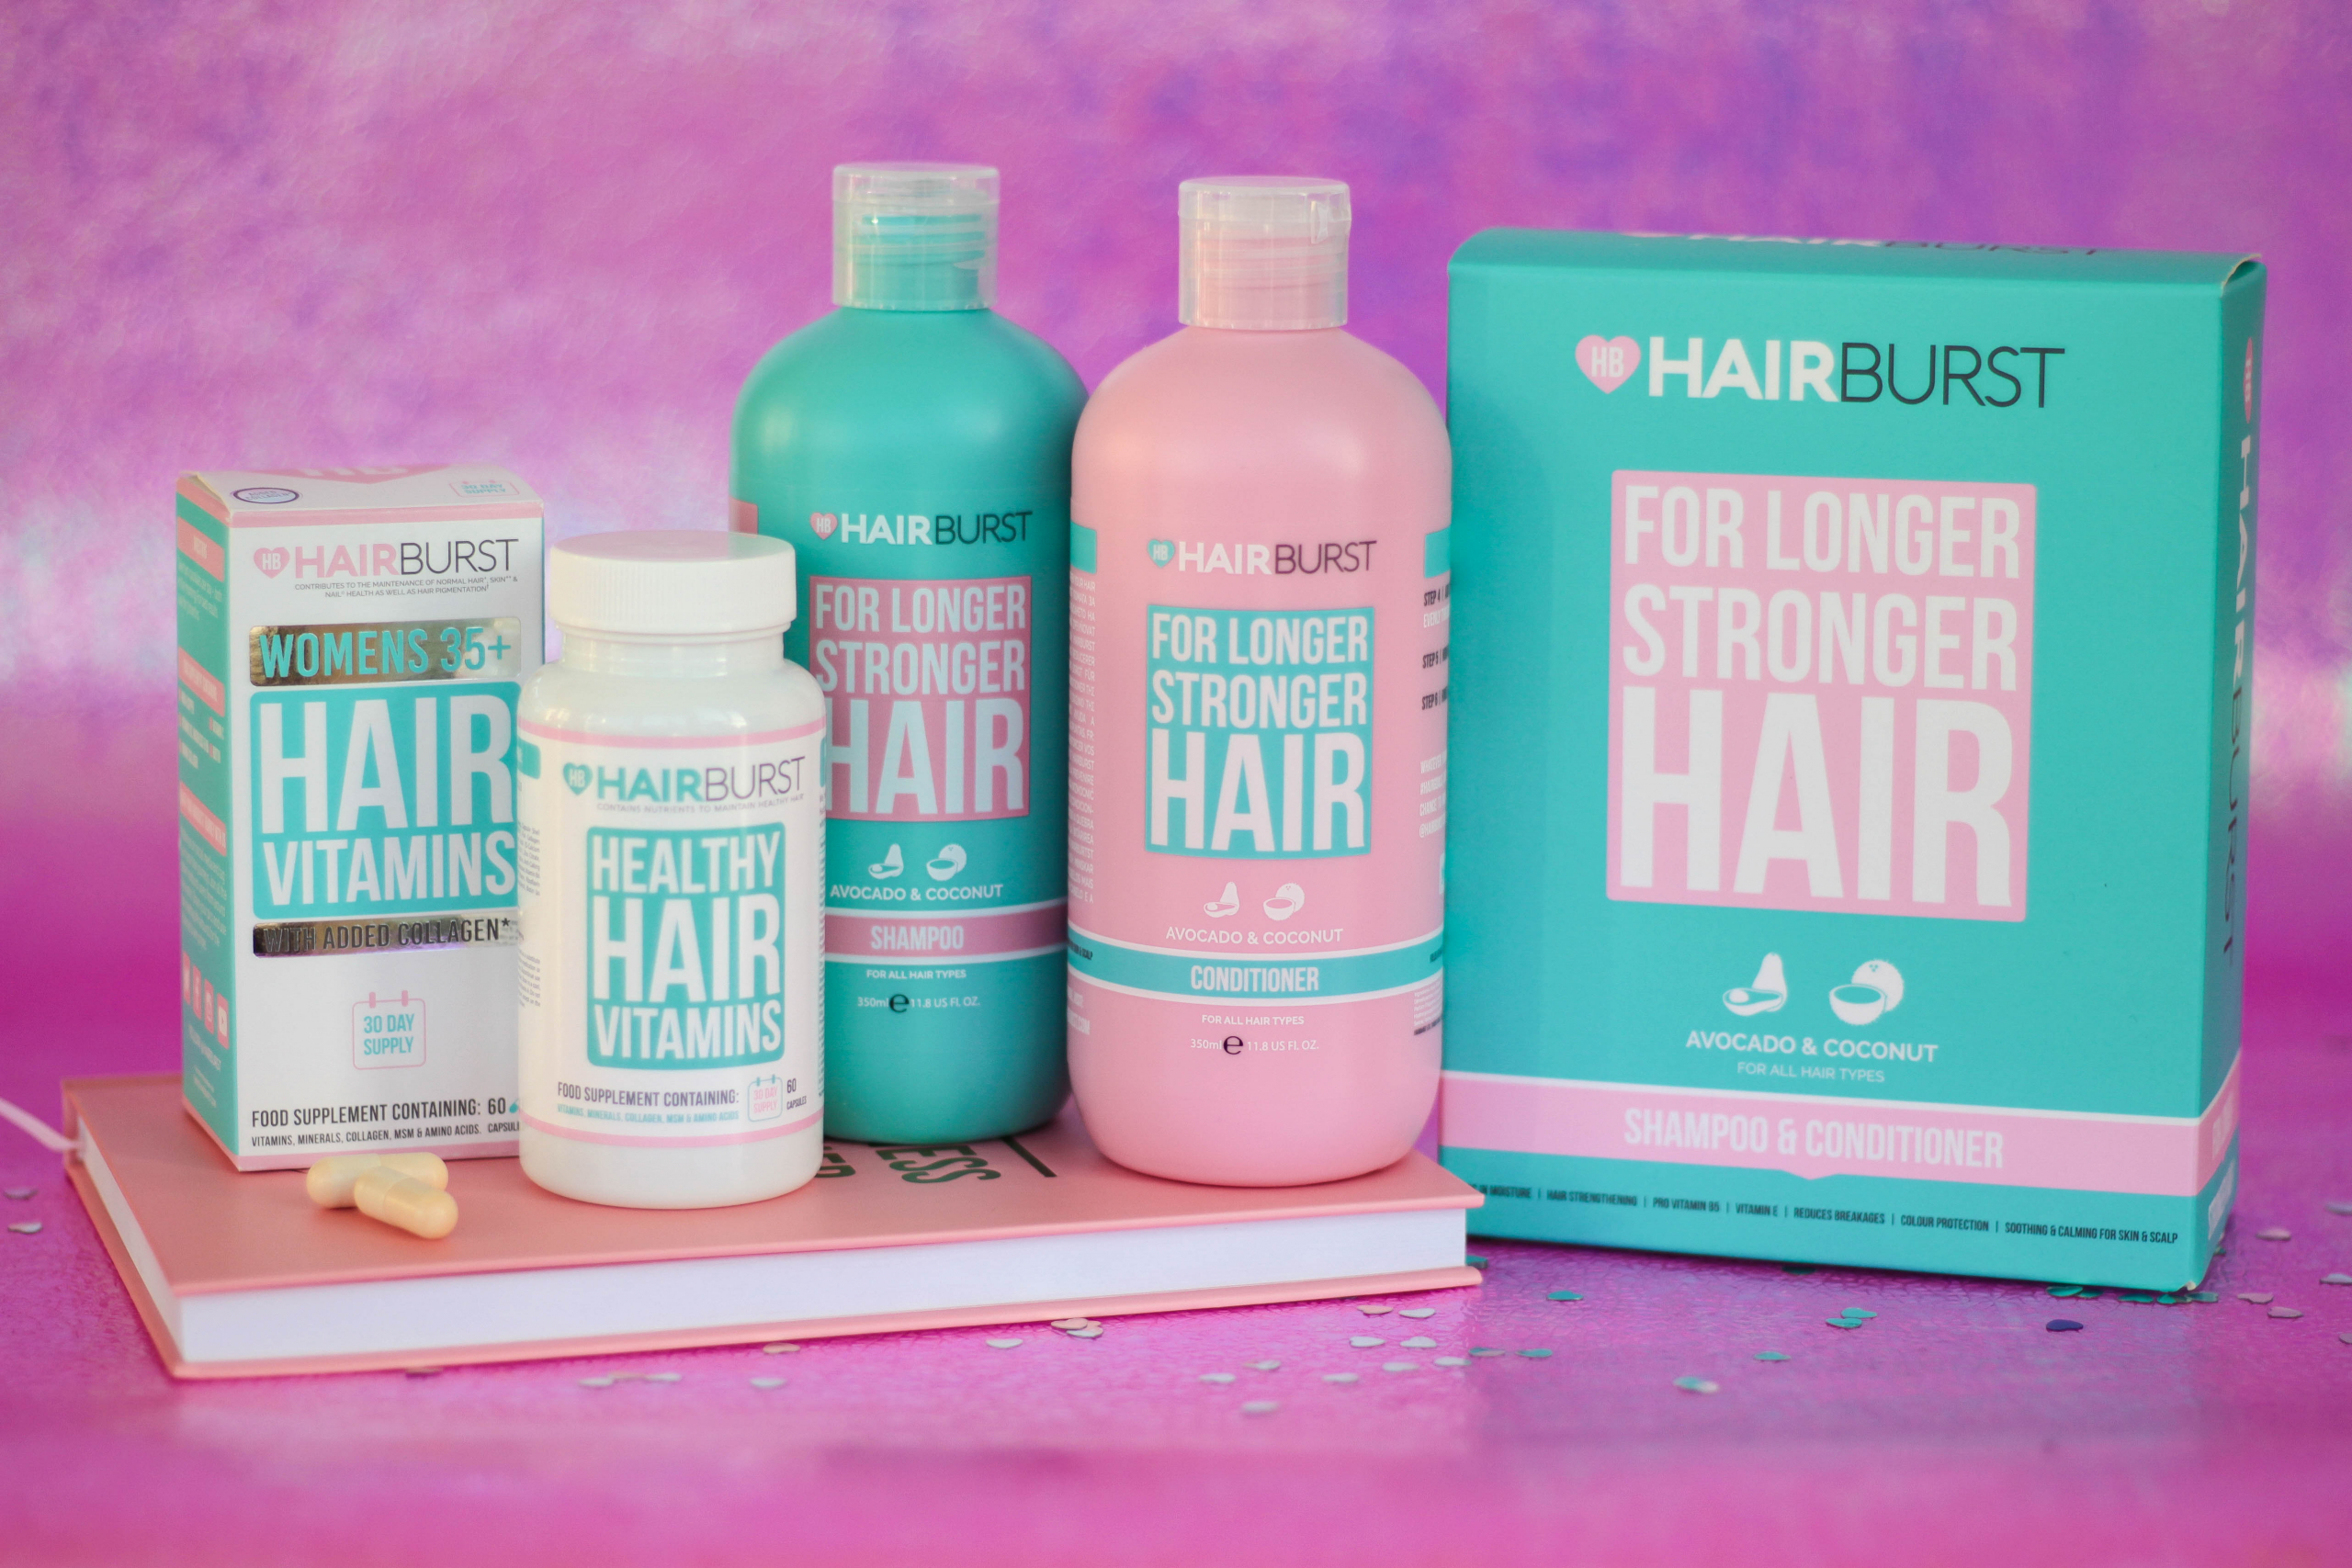 Does Hairburst Your - Tarryn London